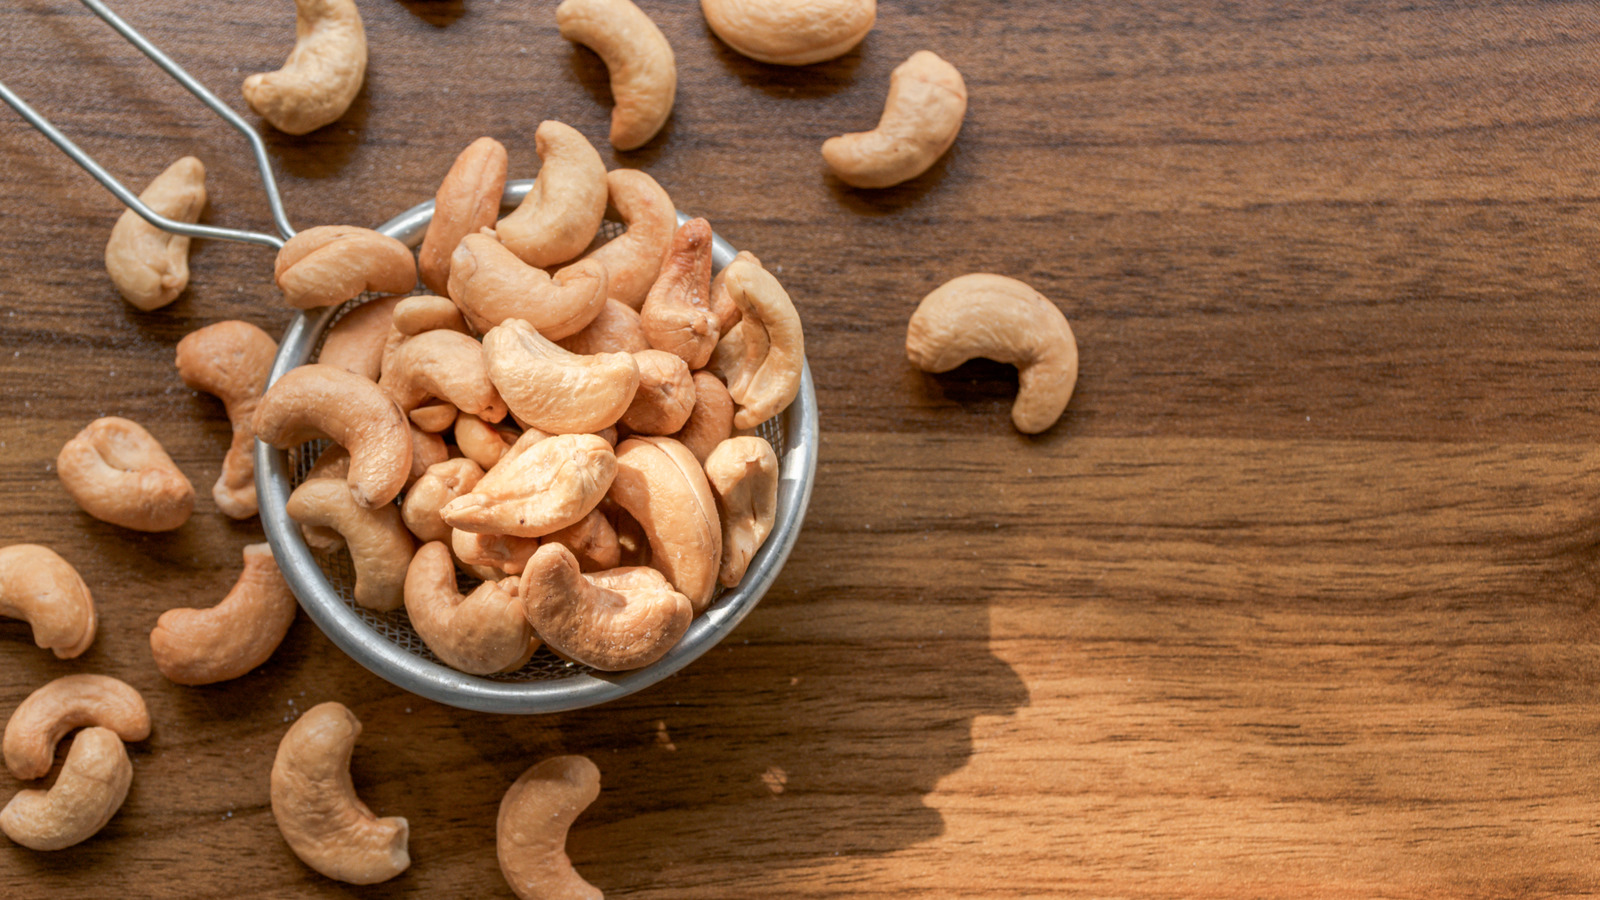 Can Magnesium Really Help You Lose Weight?